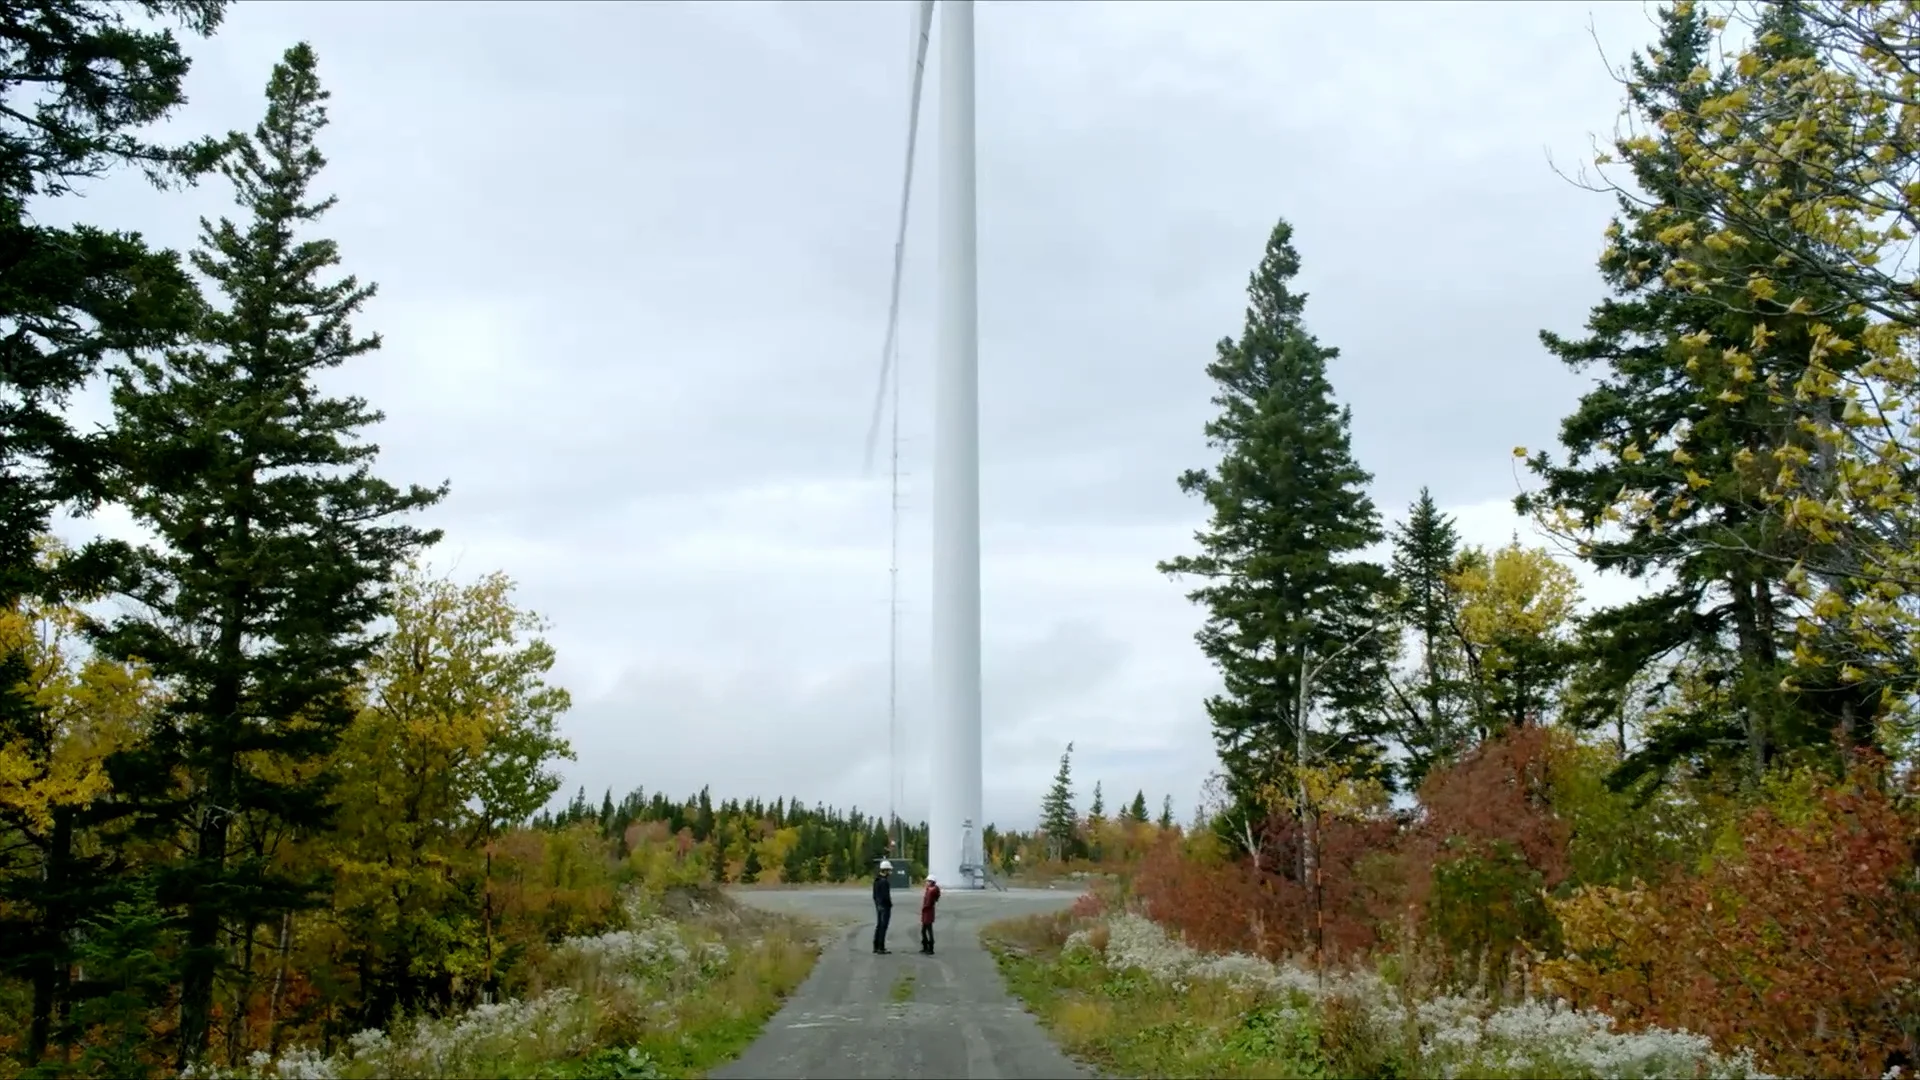 A wind turbine at the Nergica facility. (Power to the People)